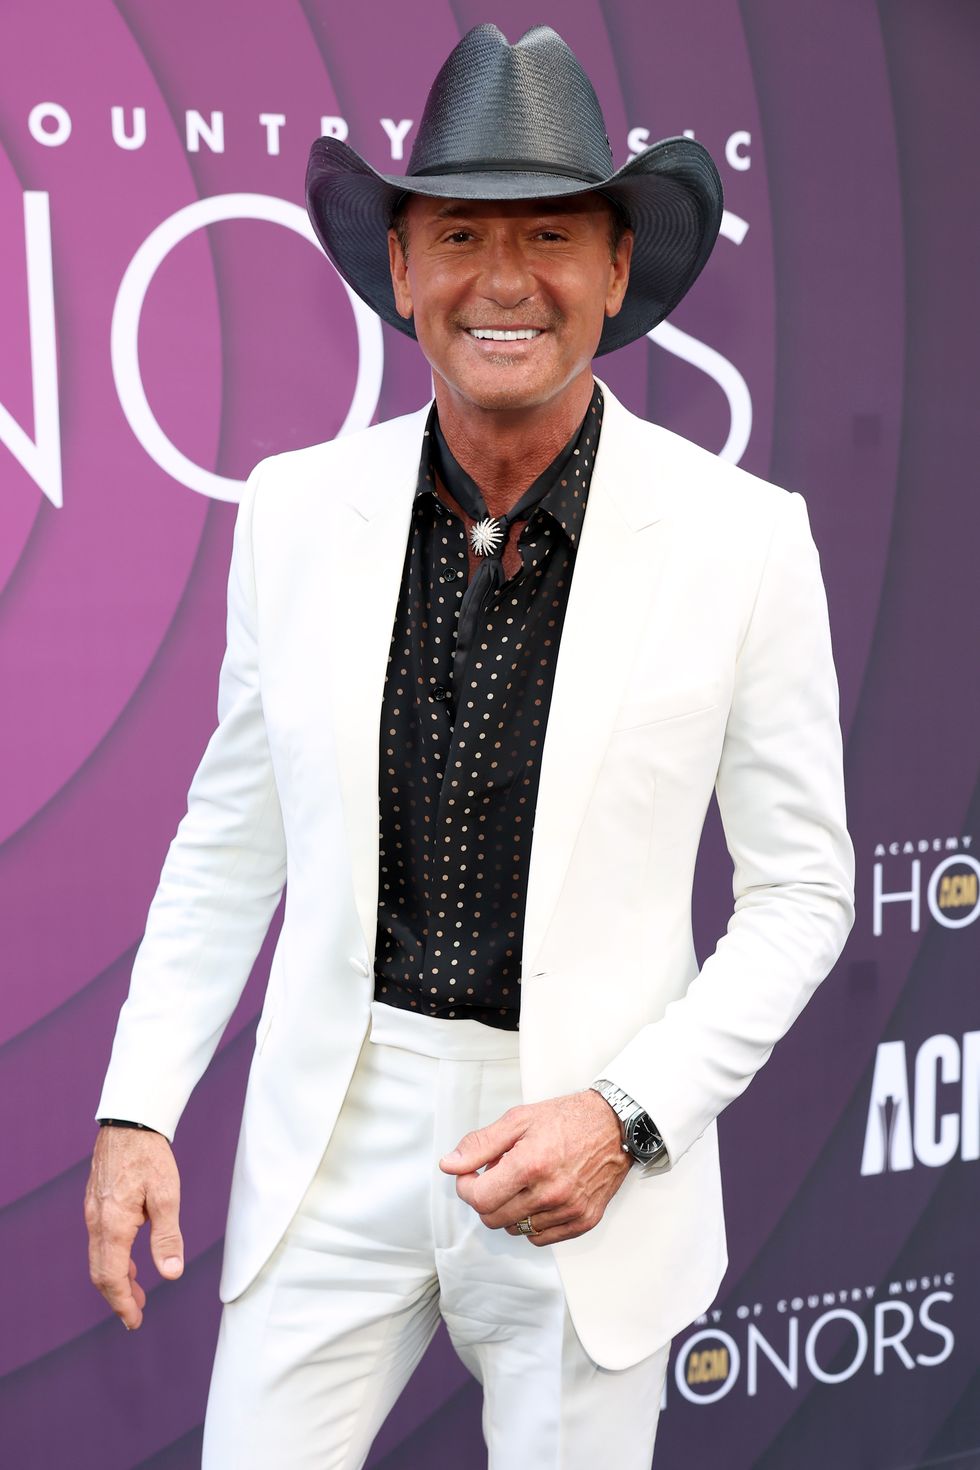 tim mcgraw wearing a white suit and black cowboy hat at an awards show